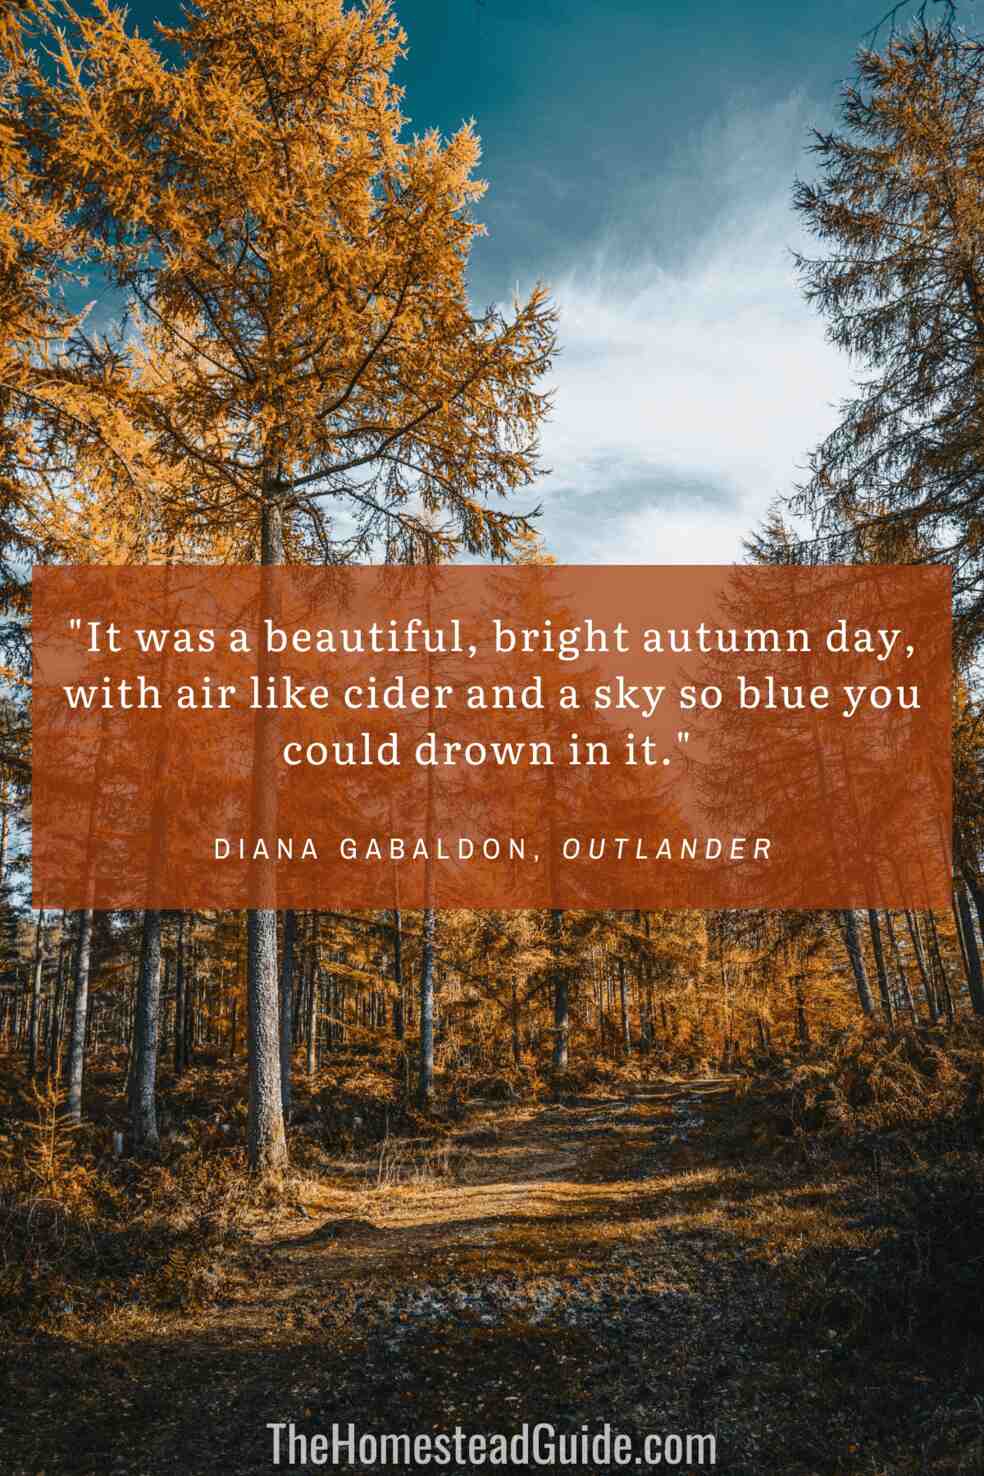 It was a beautiful, bright autumn day, with air like cider and a sky so blue you could drown in it.